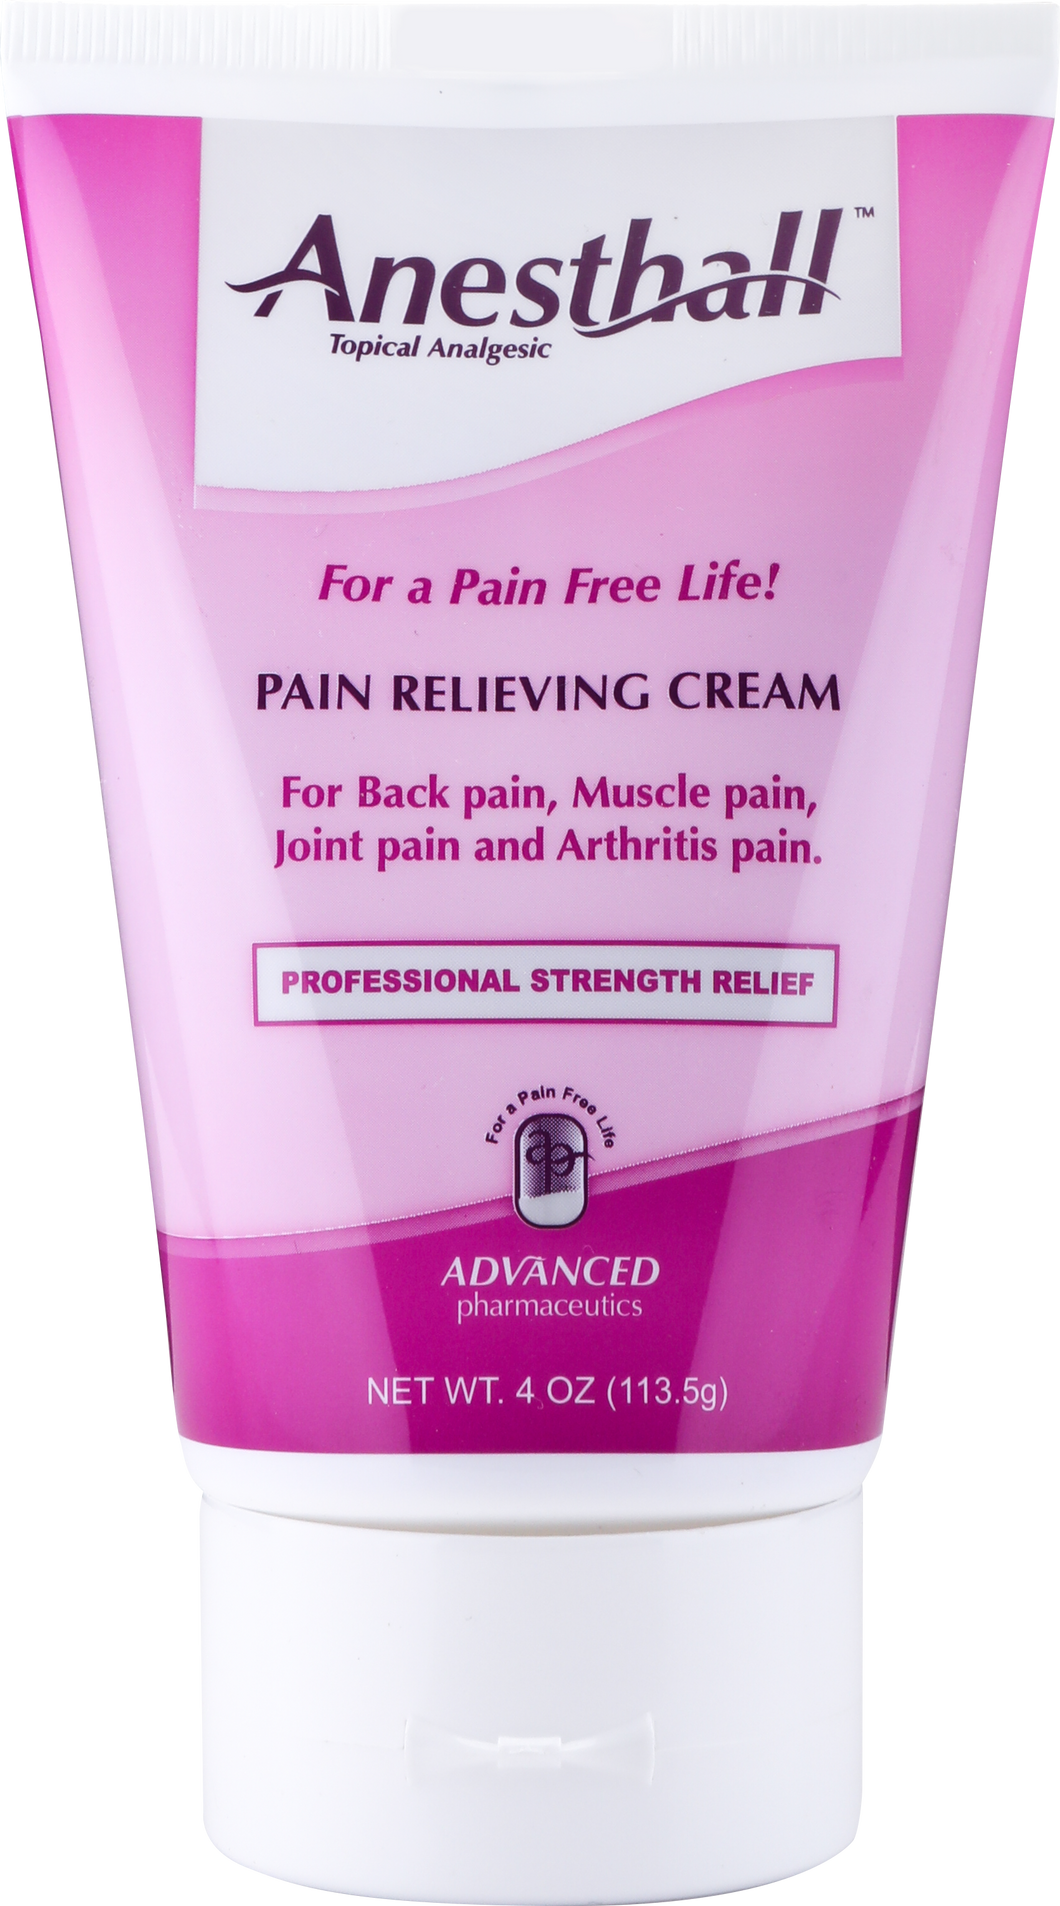 Anesthall Pain Relieving Cream Tube  48 4 OZ. Tubes